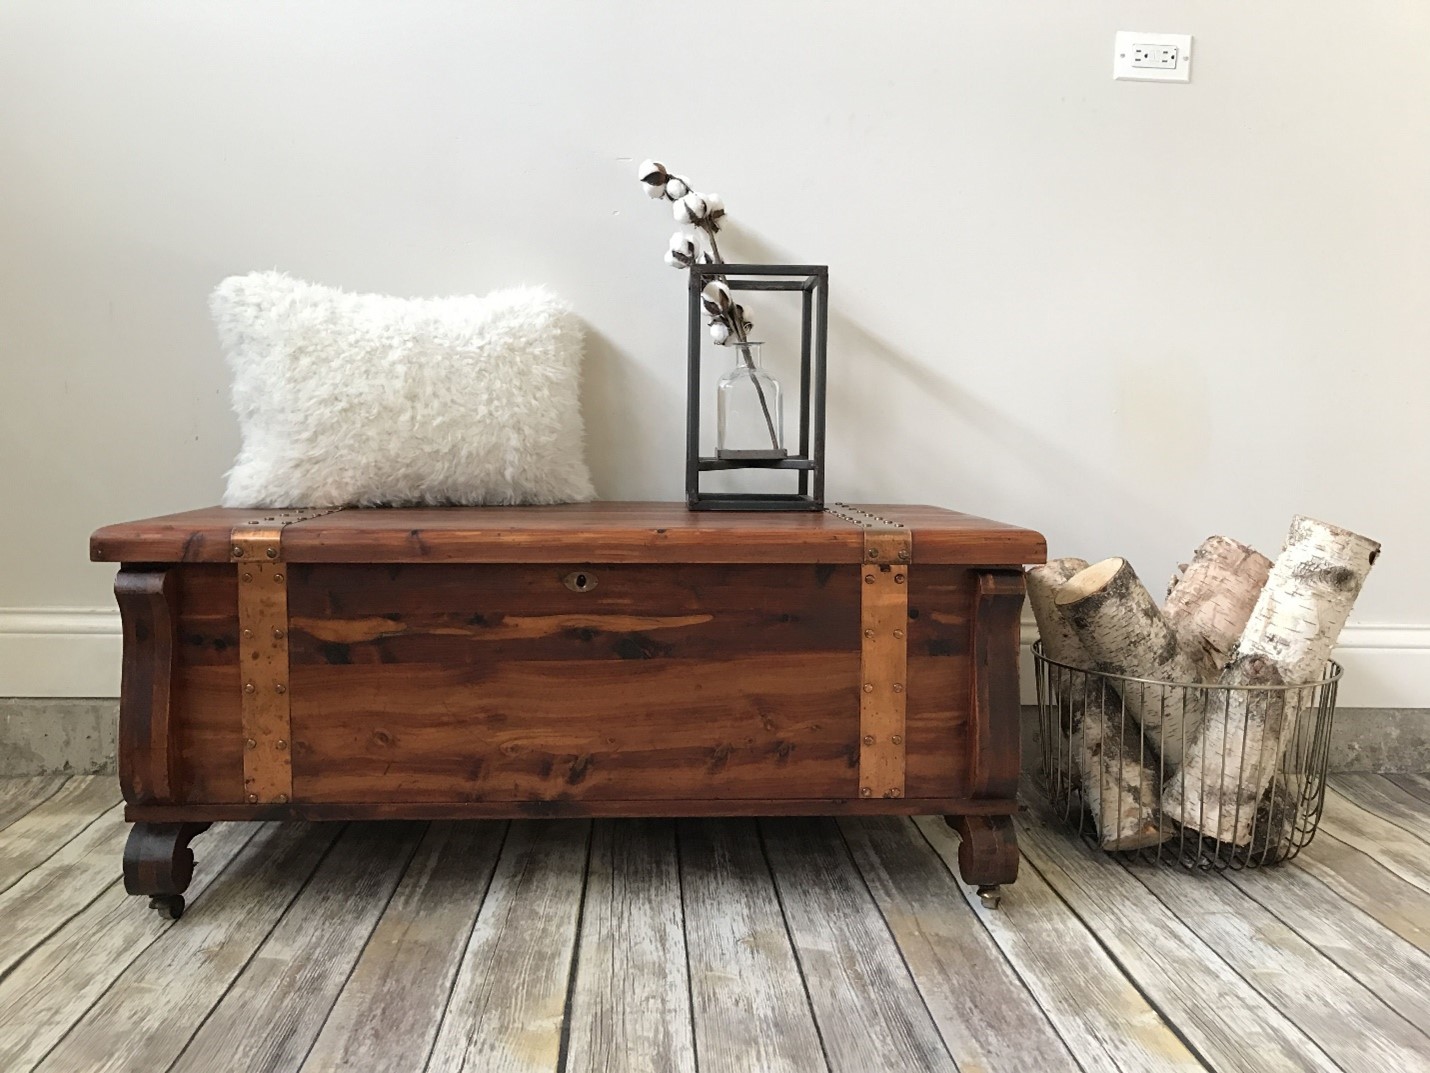 https://amishhandcrafted.b-cdn.net/wp-content/uploads/blogs/18-cedar-chest-uses/stylish-cedar-chest-used-creatively-in-a-living-room-with-a-pillow-and-decor-on-its-lid.jpg